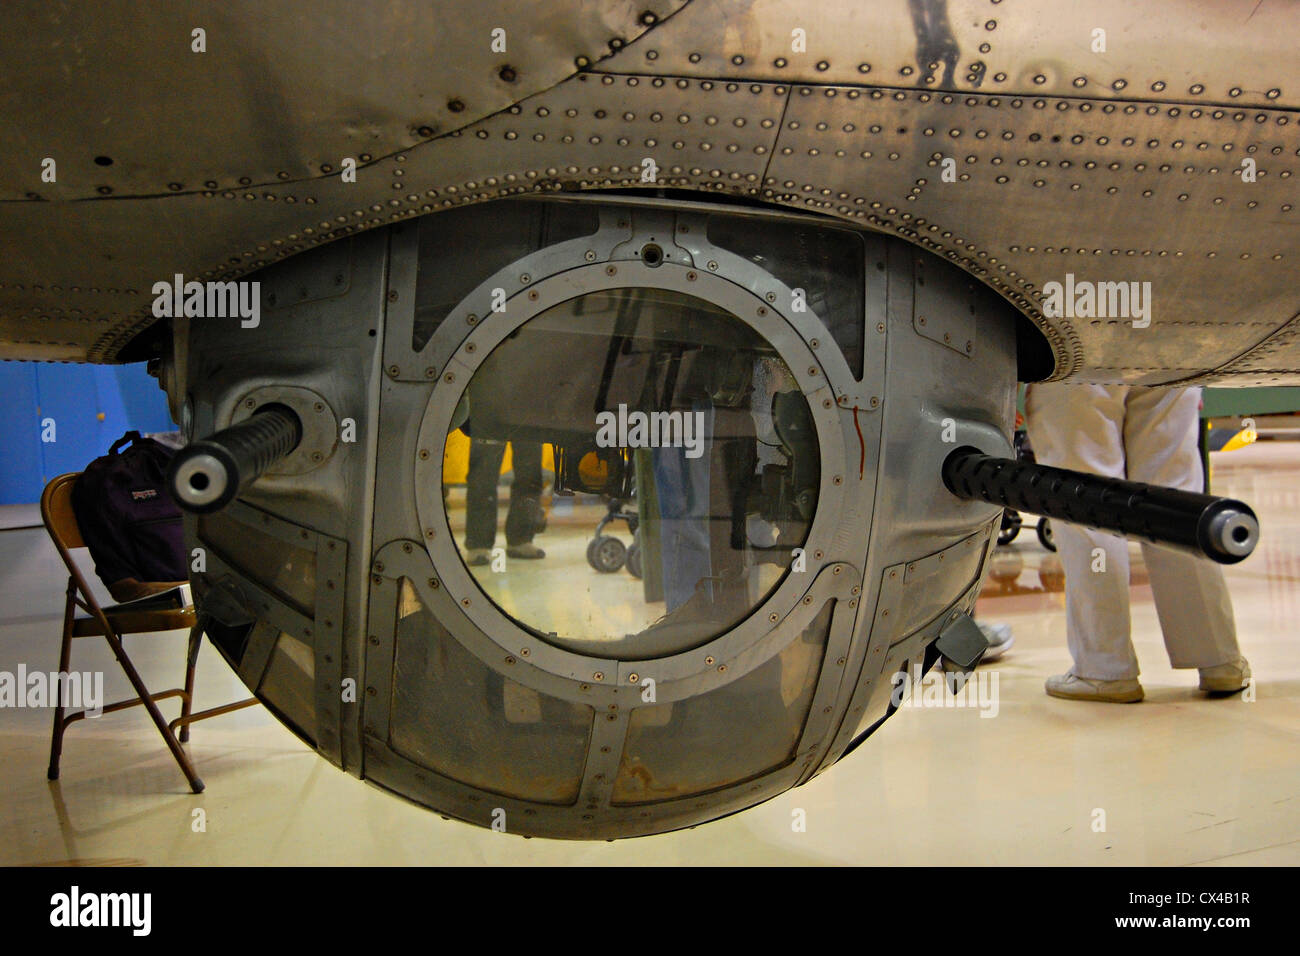 B-17 Flying Fortress Ball Turret Palm Springs Air Museum Stockfotografie -  Alamy